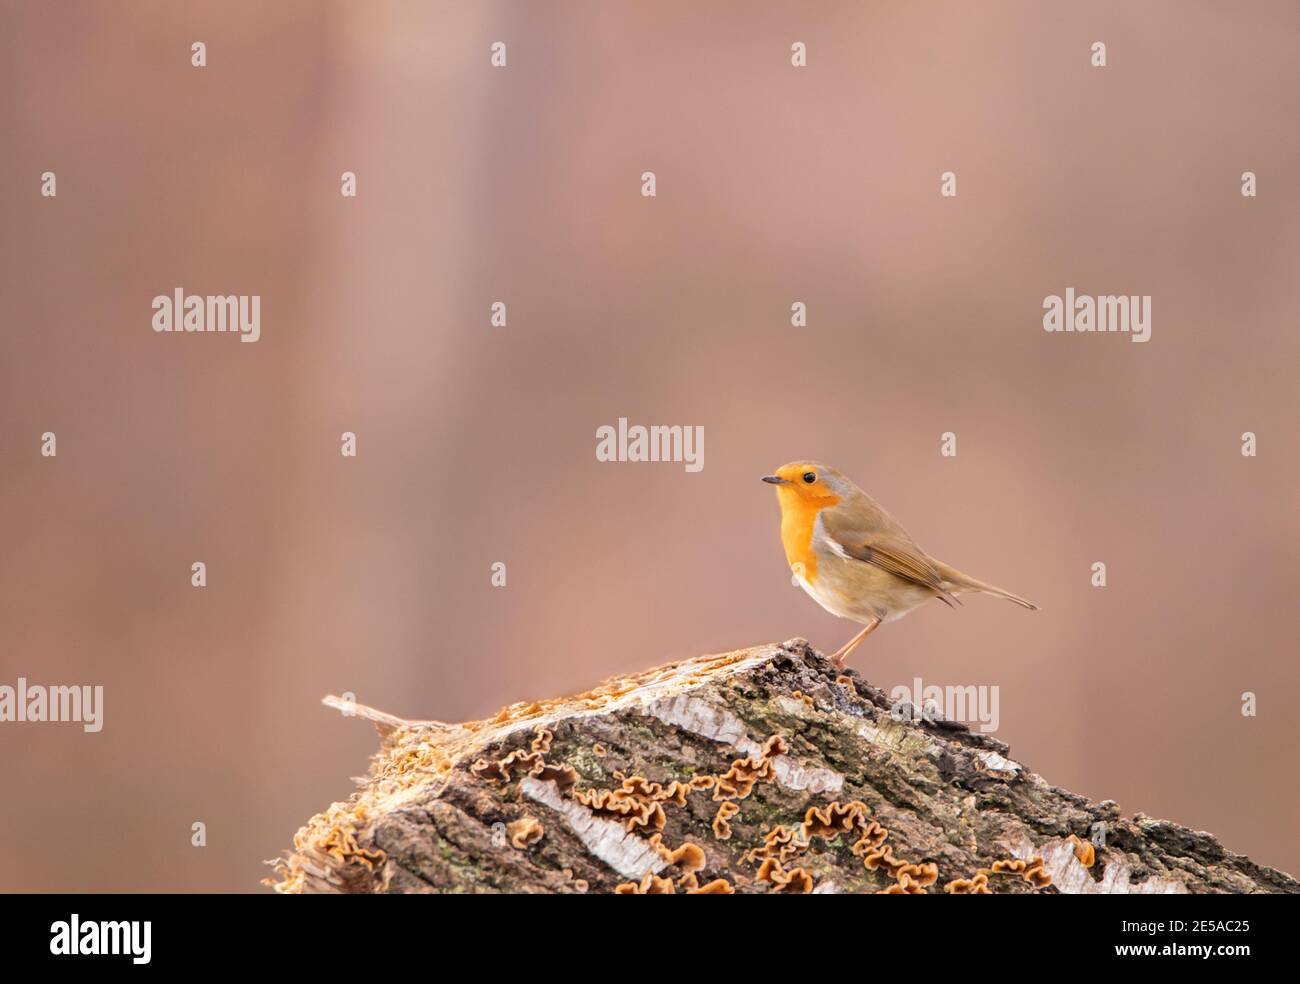 European Robin, Erithacus rubecula, perched on a log inteh British countryside with a silky smoth pink sunset behind Stock Photo